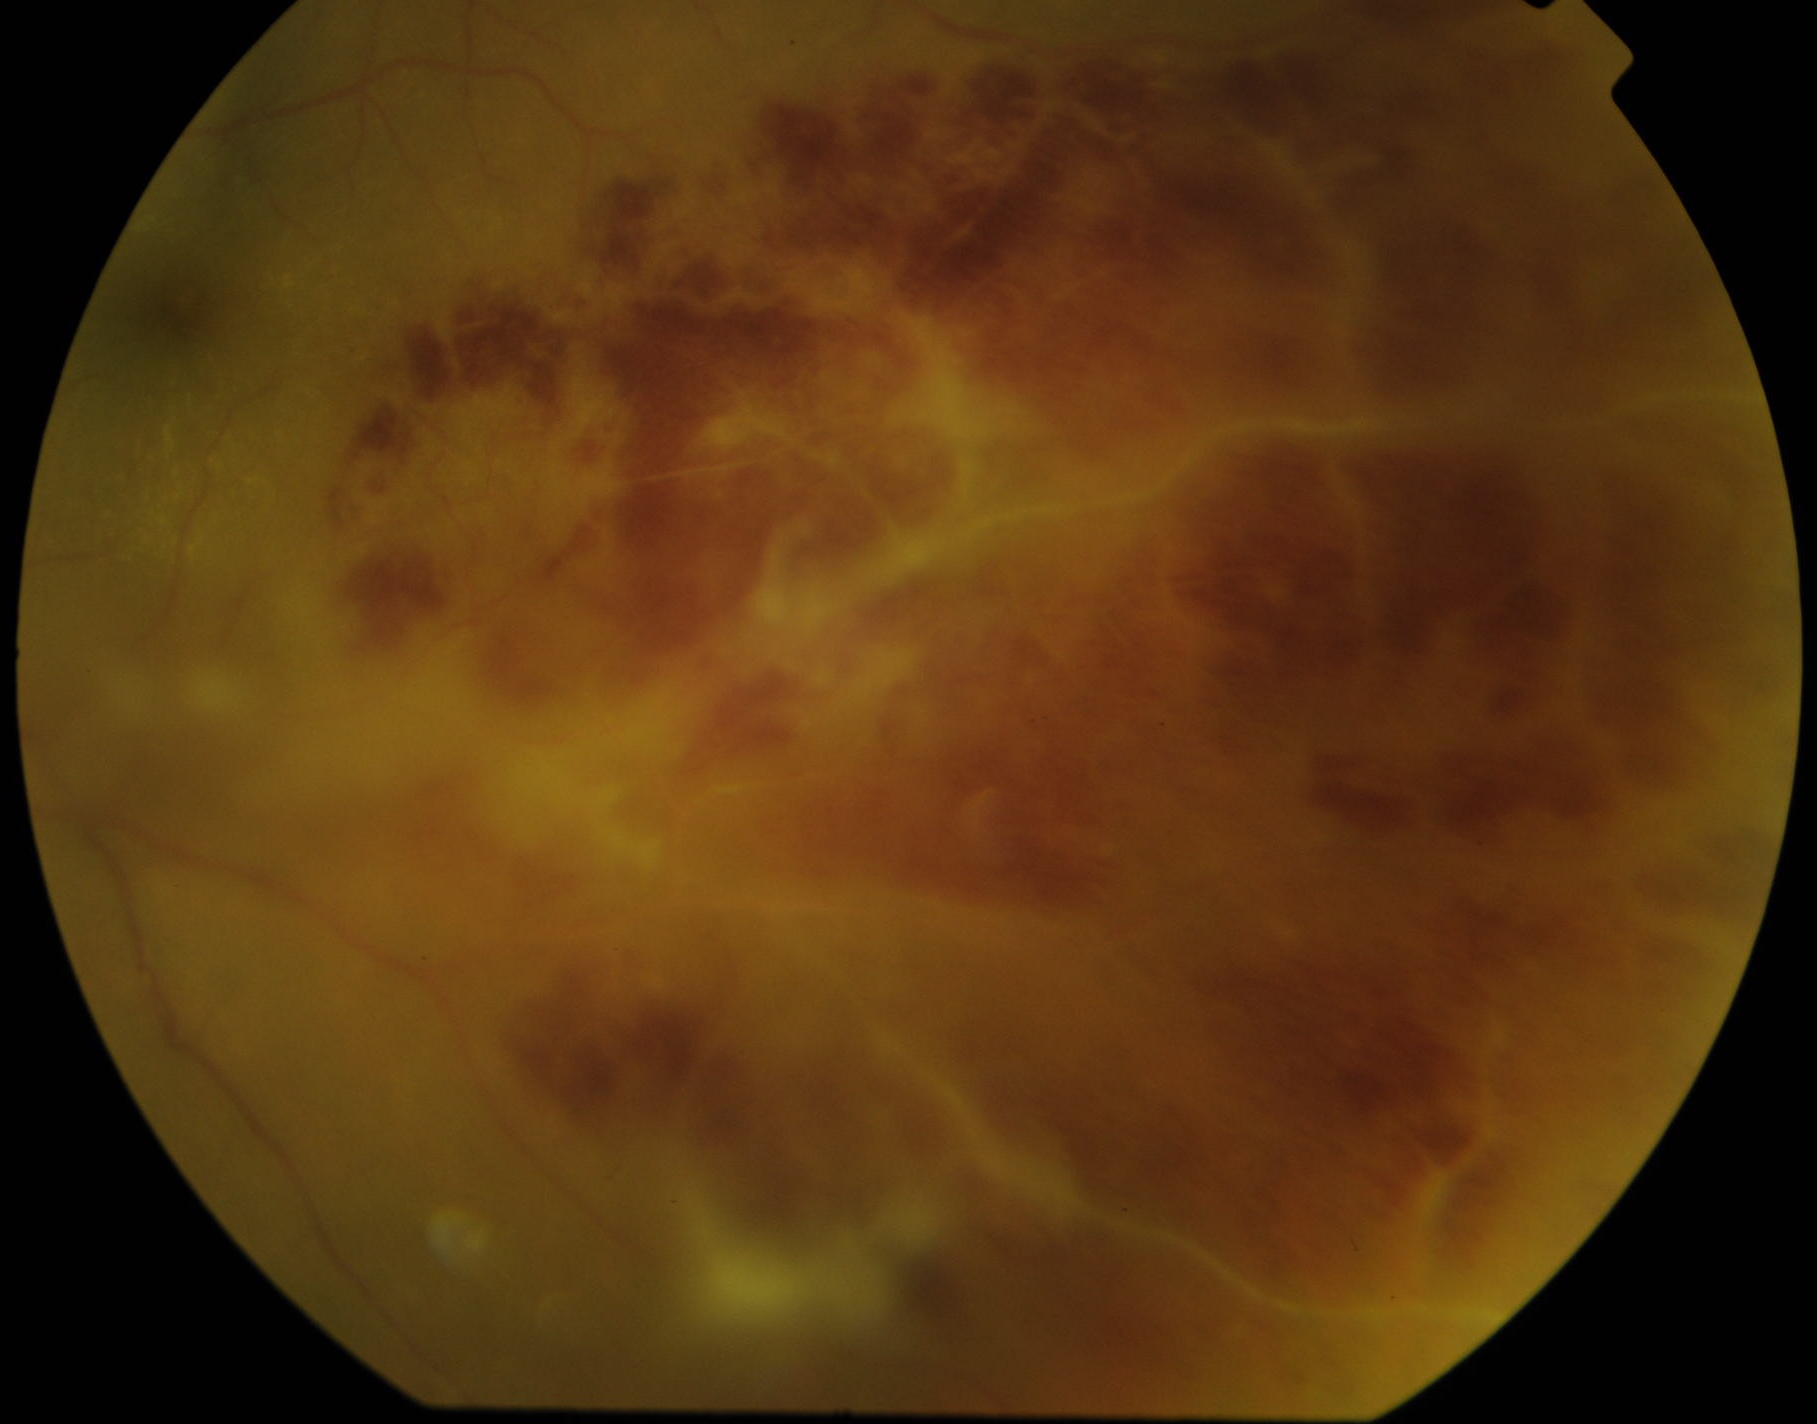 Figure 4.2.3 Periphlebitis and Branch Retinal Vein Occlusion Secondary to Toxoplasmosis Uveitis